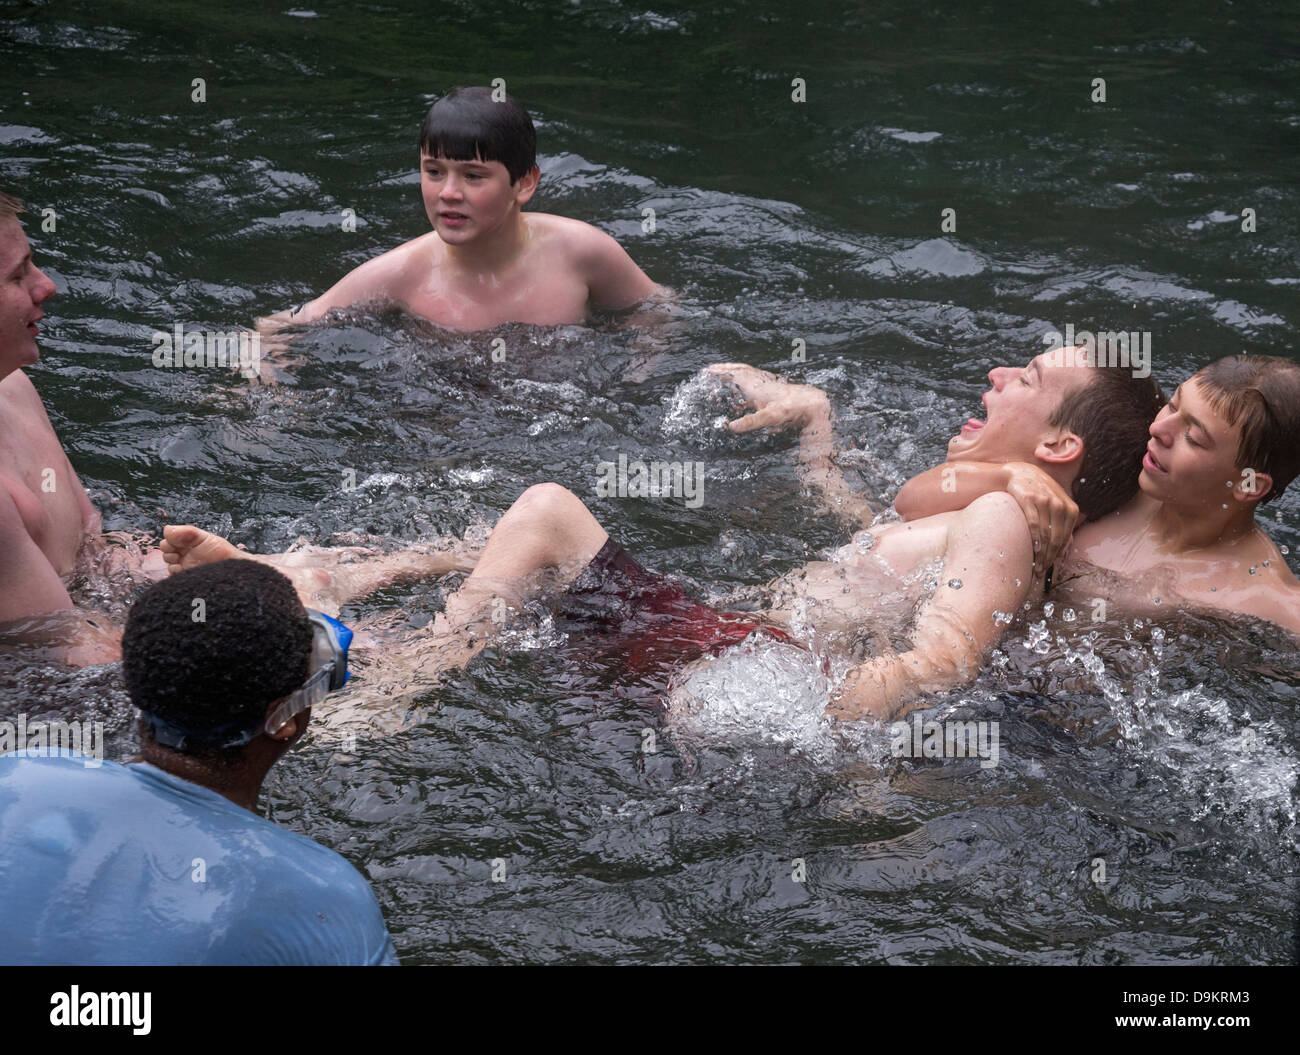 Teenage boys roughhouse in the waters of Manatee Springs State Park along the Suwannee River in North Florida. Stock Photo